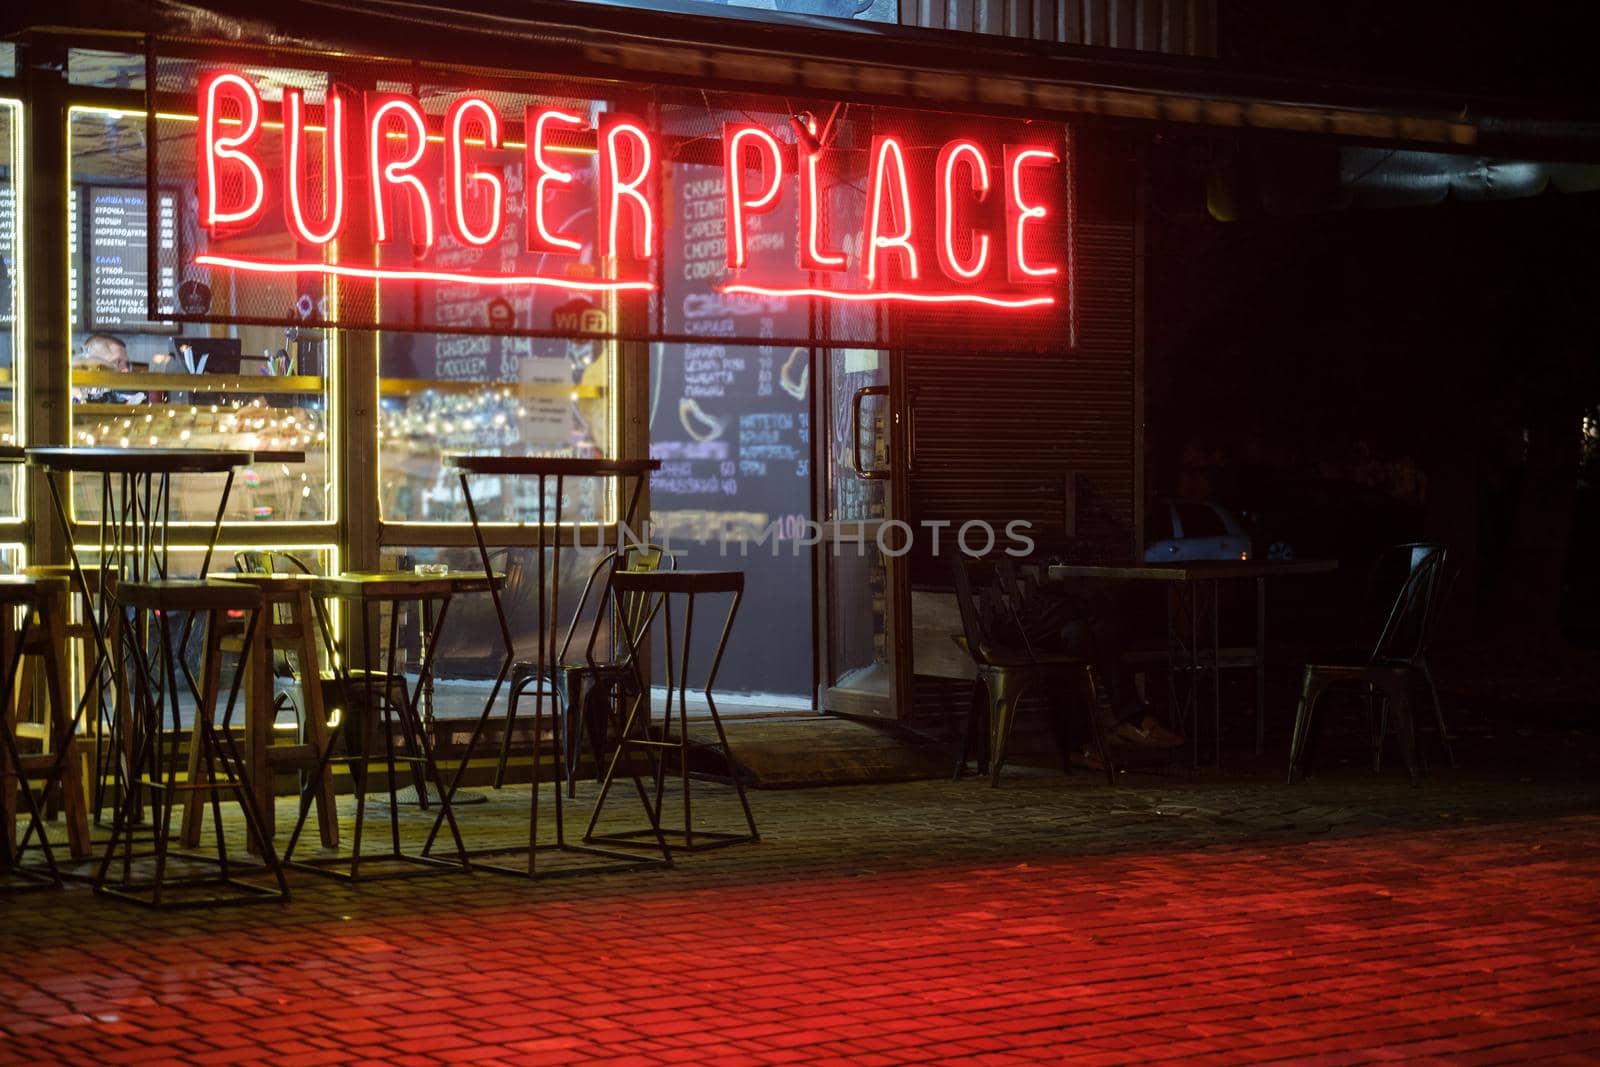 burger place, restaurant sign in red neon letters, Copy free space for logo, text. download photo